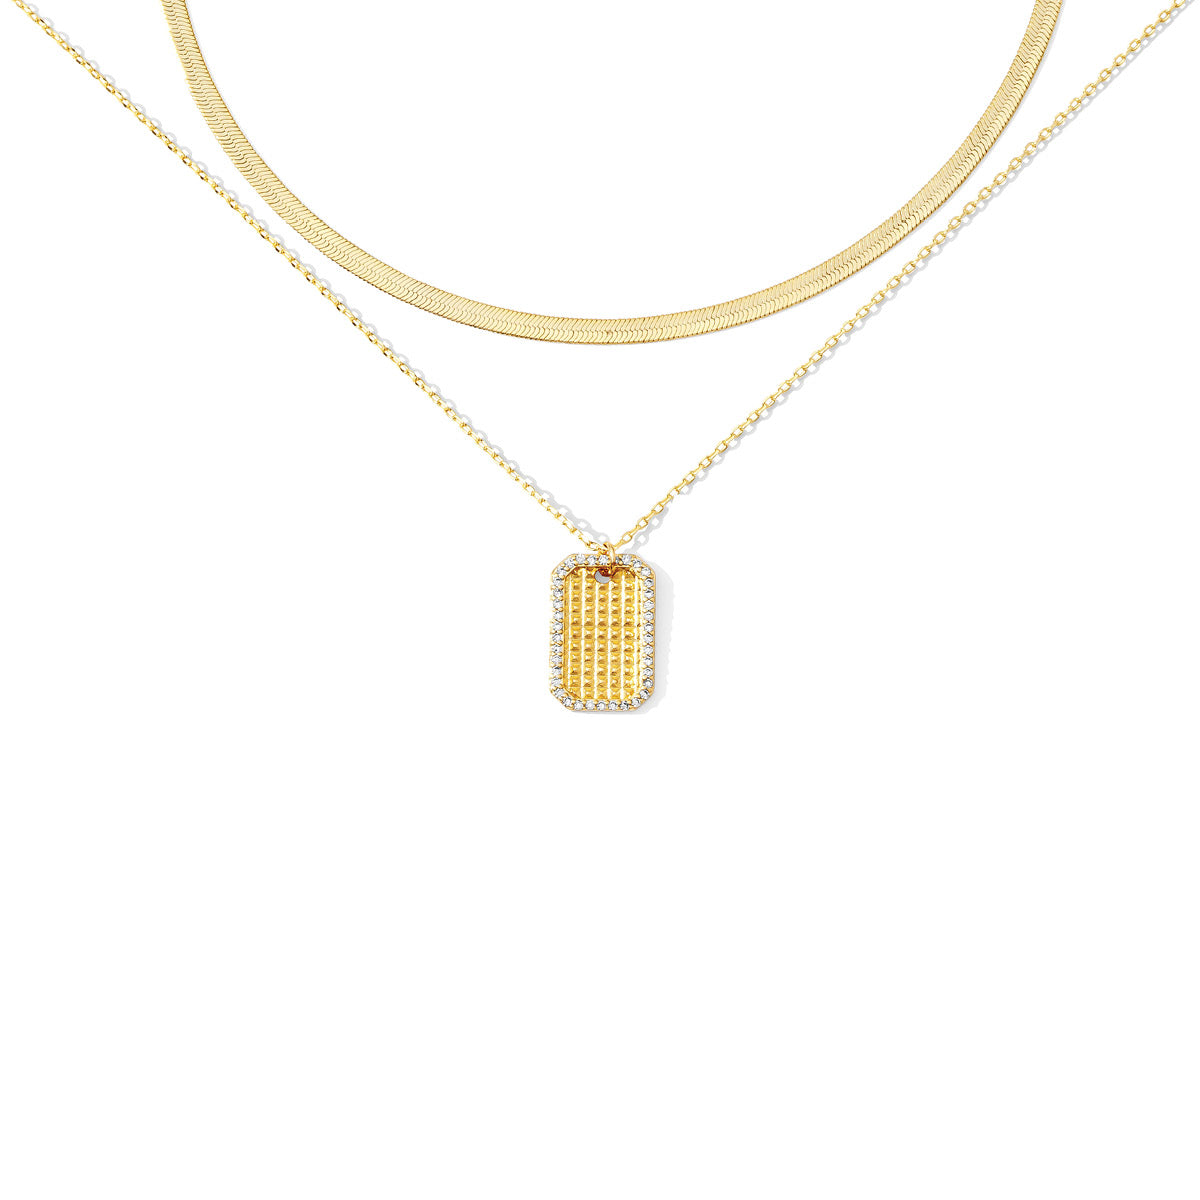 Layered Necklace With Textured Pave Pendant